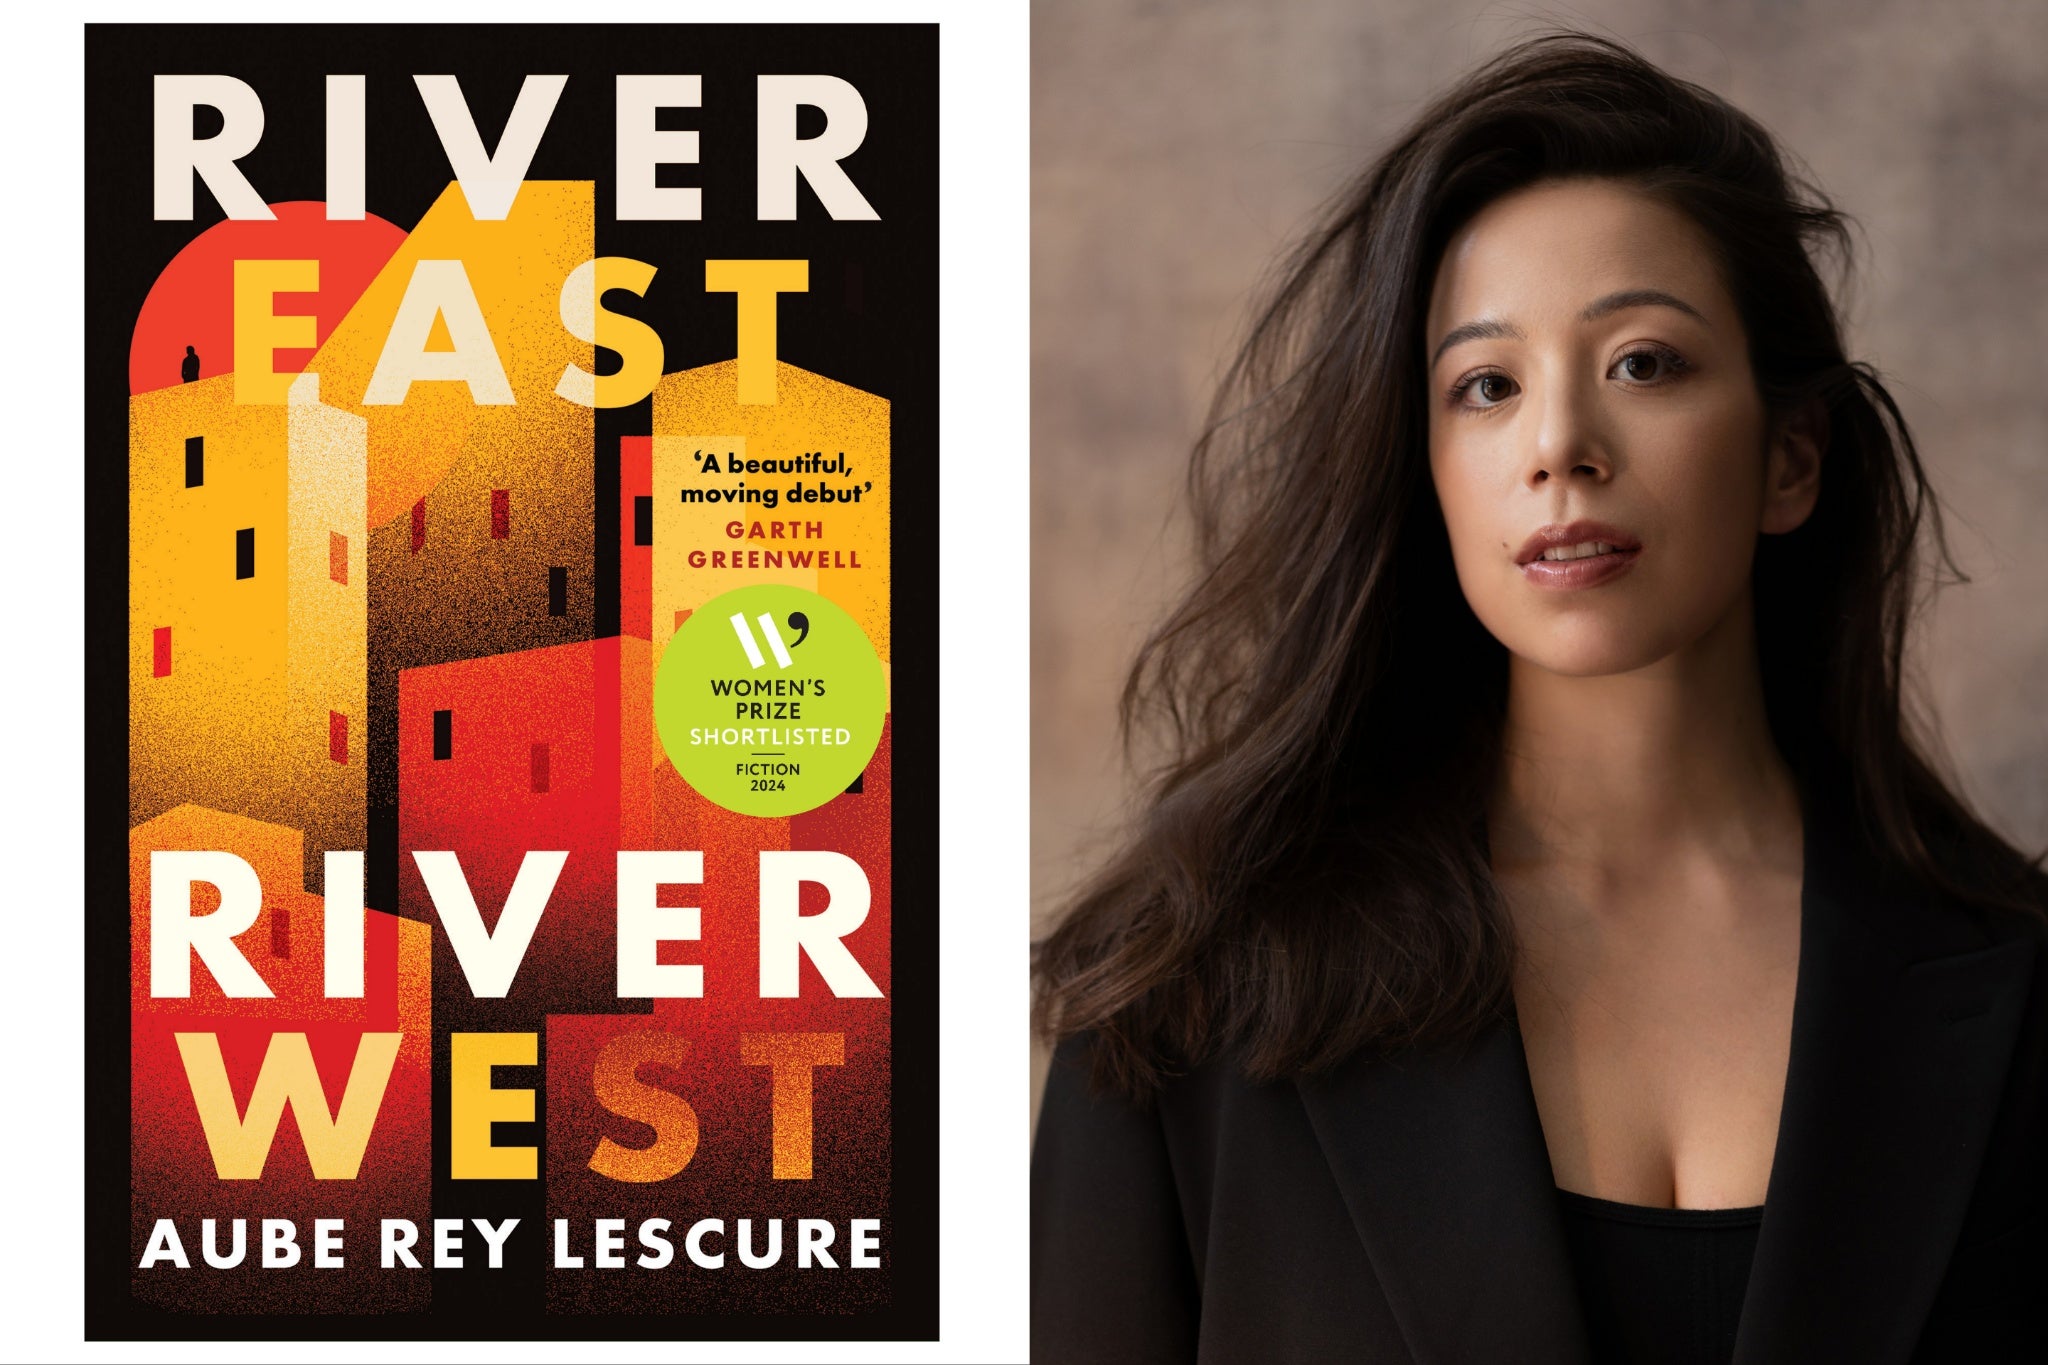 River East, River West and its author, Aube Rey Lescure